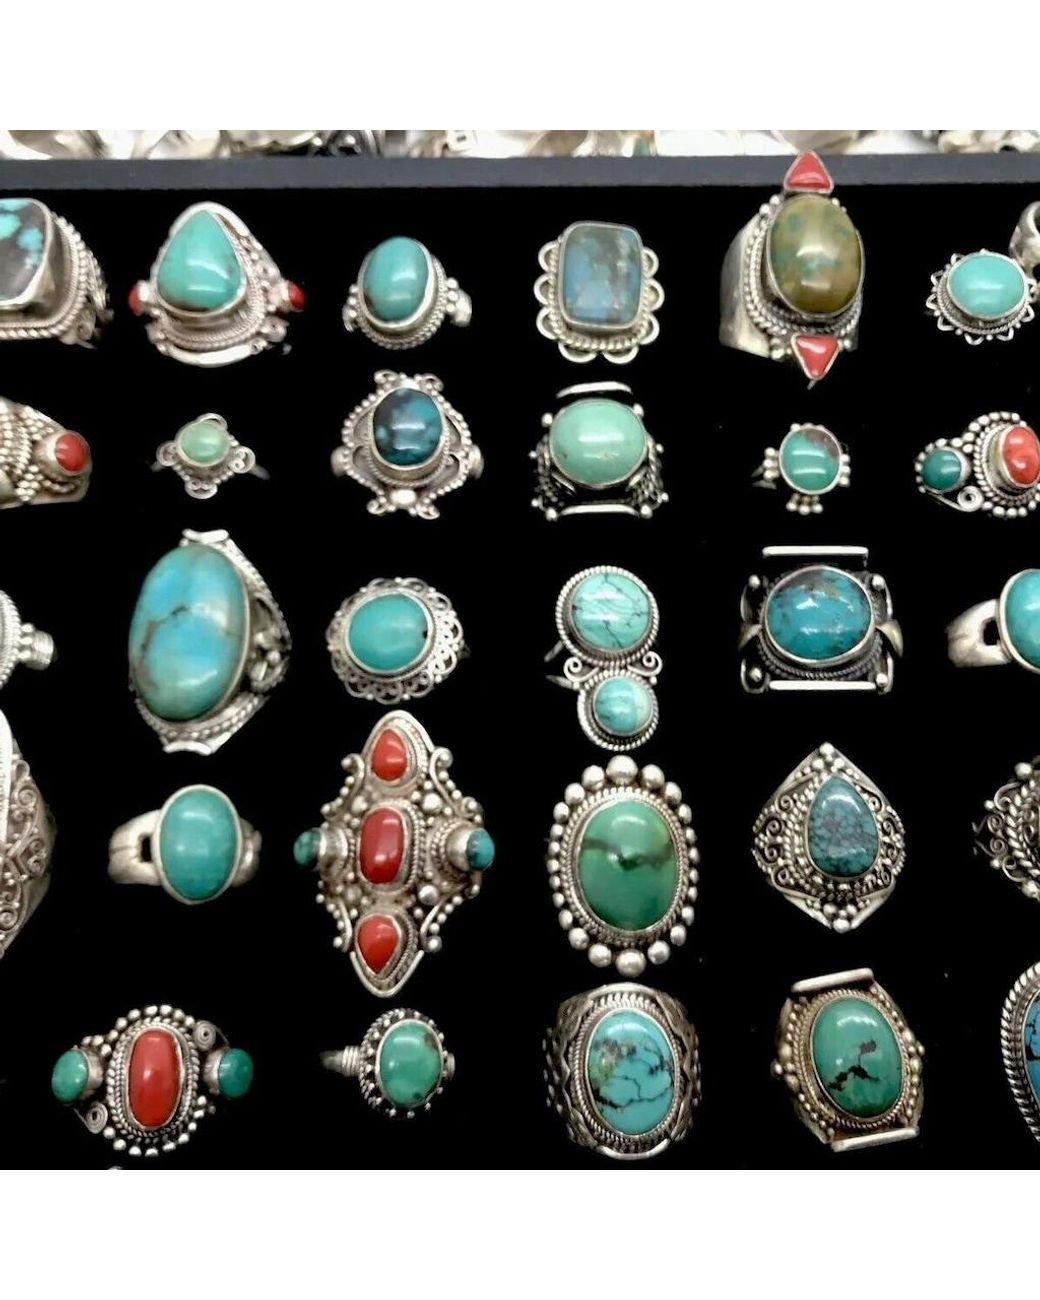 6 TO 8.5 US s212 WHOLESALE 21PC 925 SILVER PLATED TURQUOISE RING LOT 